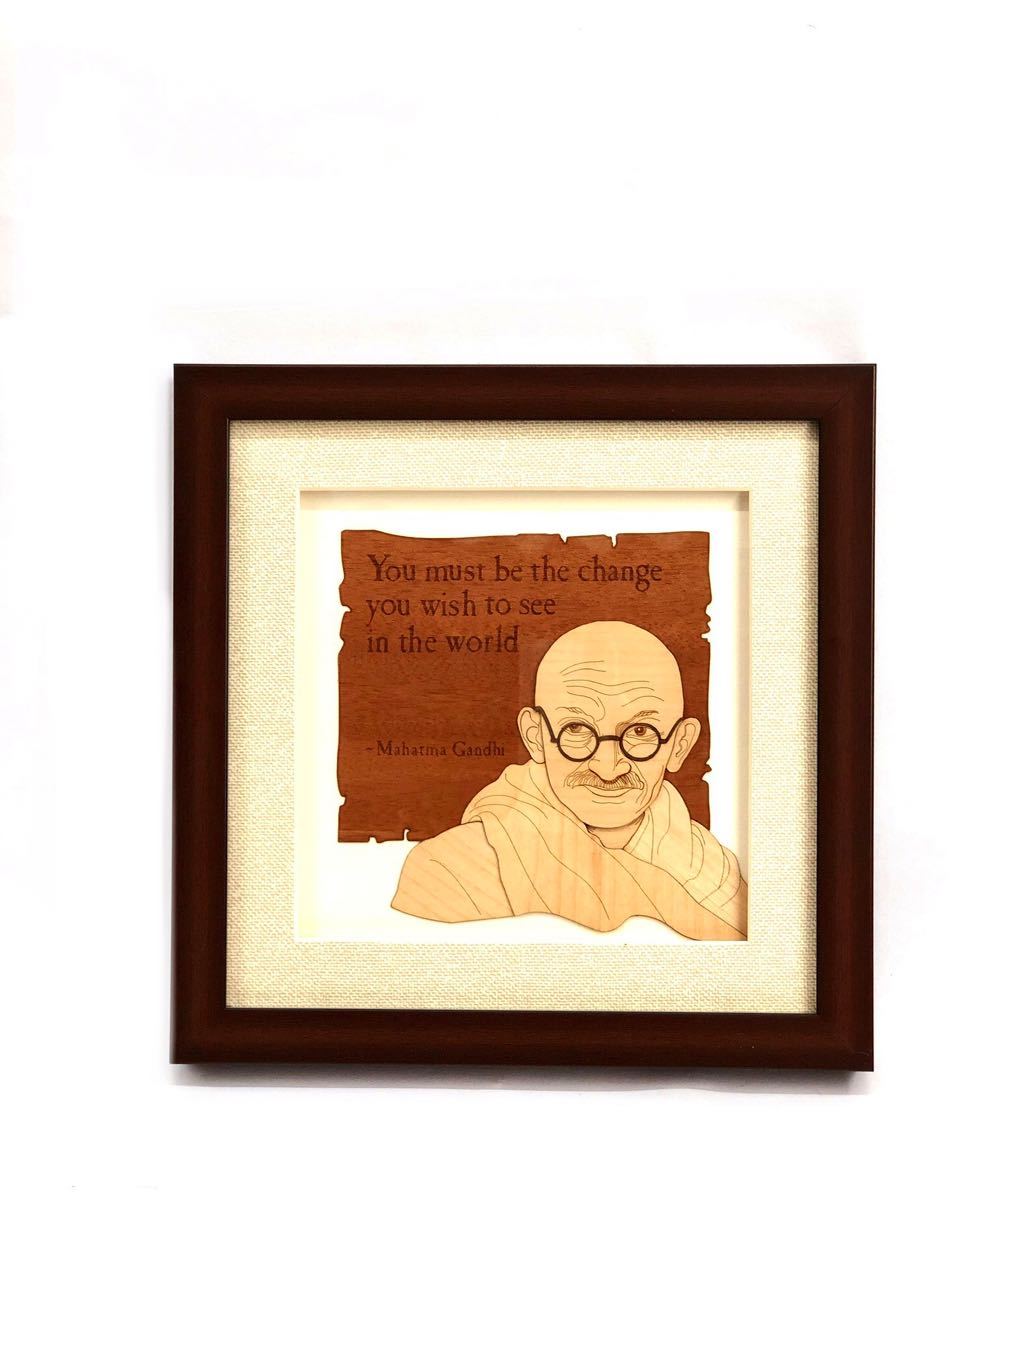 Wise Words By Mahatma Gandhi In Beautiful Wooden Craft Frames At Tamrapatra